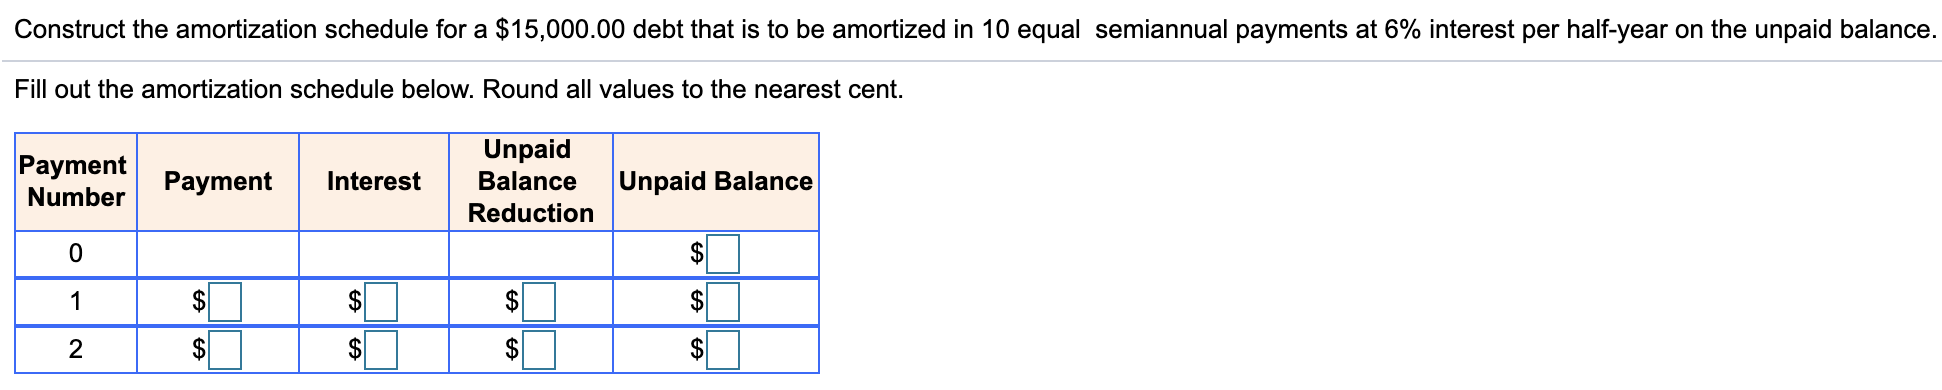 Construct the amortization schedule for a $15,000.00 debt that is to be amortized in 10 equal semiannual payments at 6% interest per half-year on the unpaid balance.
Fill out the amortization schedule below. Round all values to the nearest cent.
Unpaid
Payment
Number
Payment
Interest
Balance
Unpaid Balance
Reduction
$
